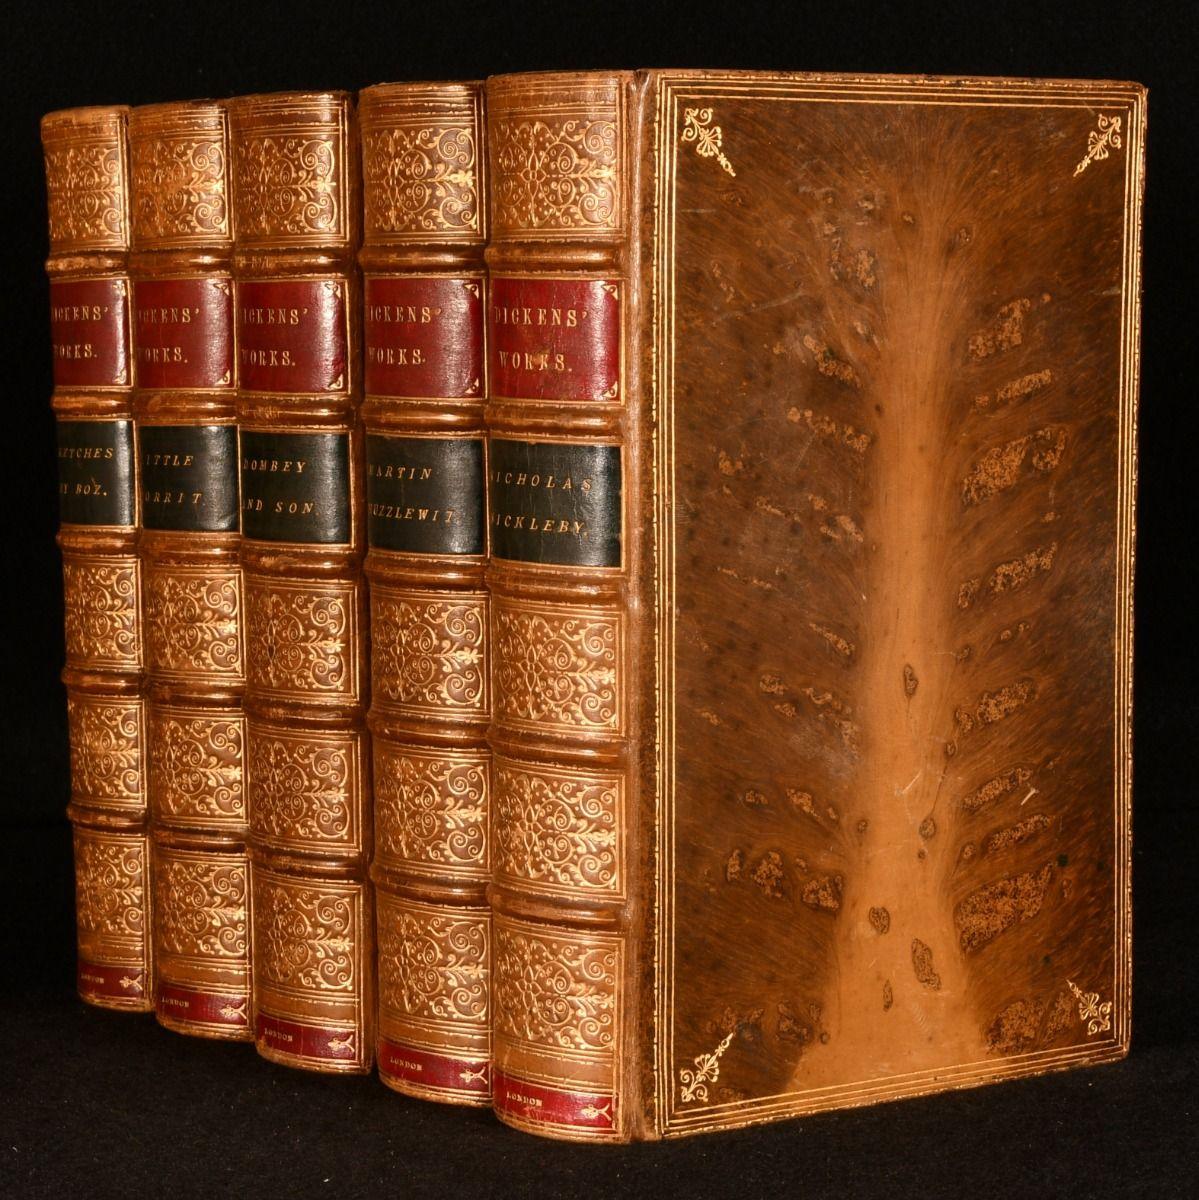 A beautiful and very clean and bright set of works by renowned author Charles Dickens. In a tree calf Mansell binding.

Five volumes. From the renowned English writer and social critic, Charles Dickens. This collection includes: The Life and